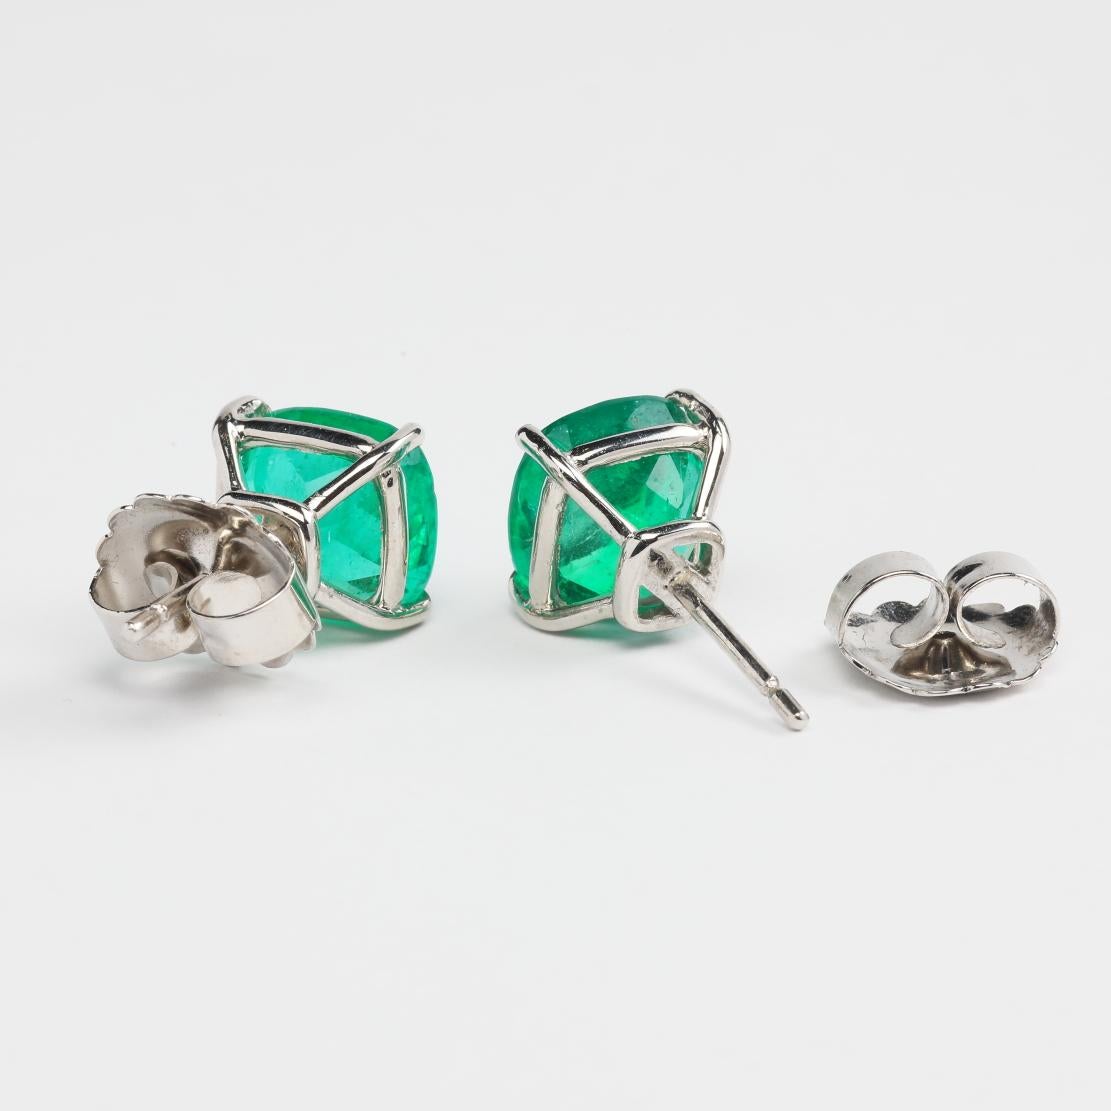 Cushion Cut Colombian Green Emeralds and 18K White Gold Stud Earrings